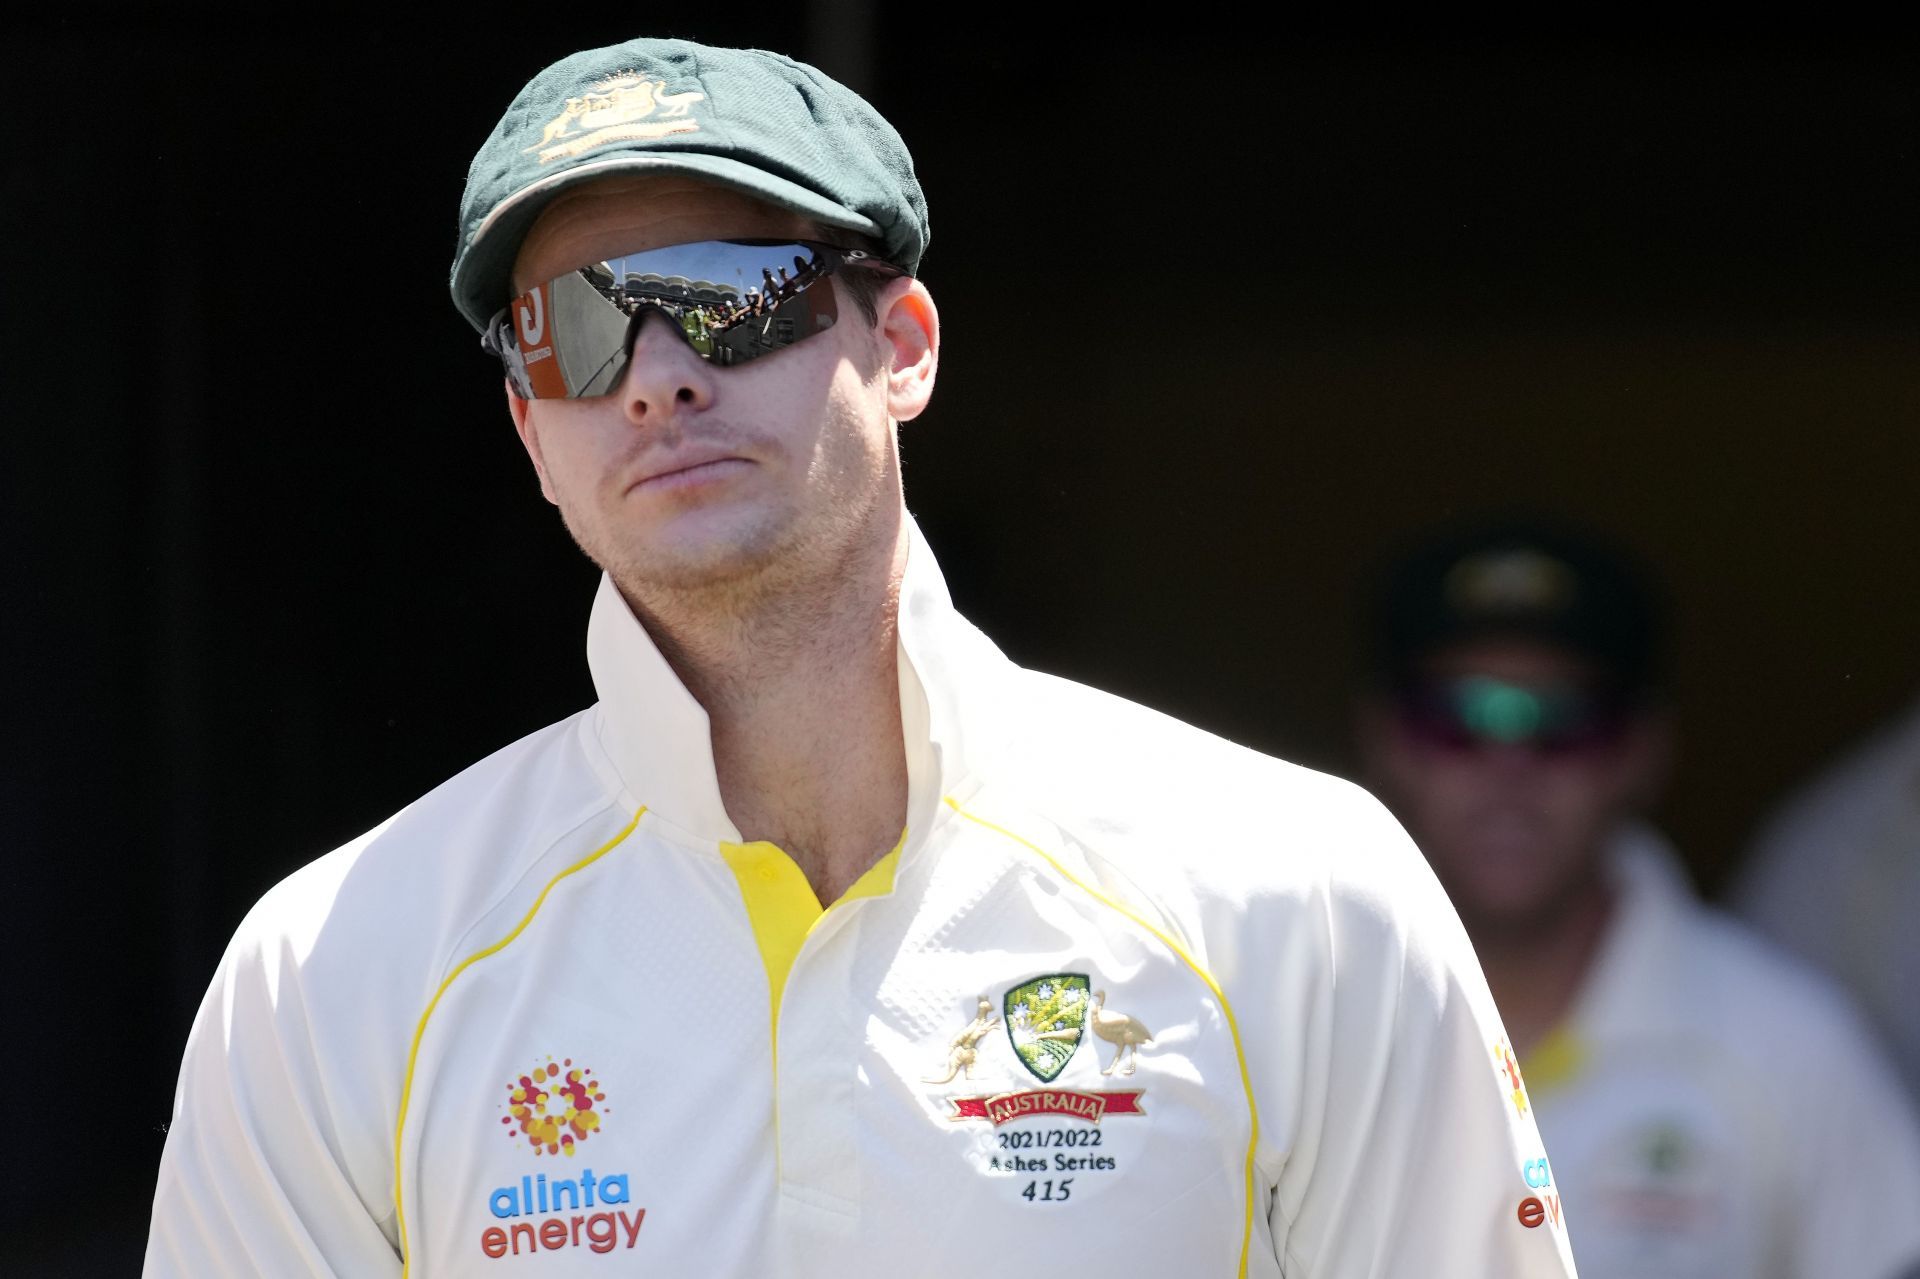 Steve Smith had a good return to Test captaincy as Australia defeated England in Adelaide. (Credit: Getty Images)